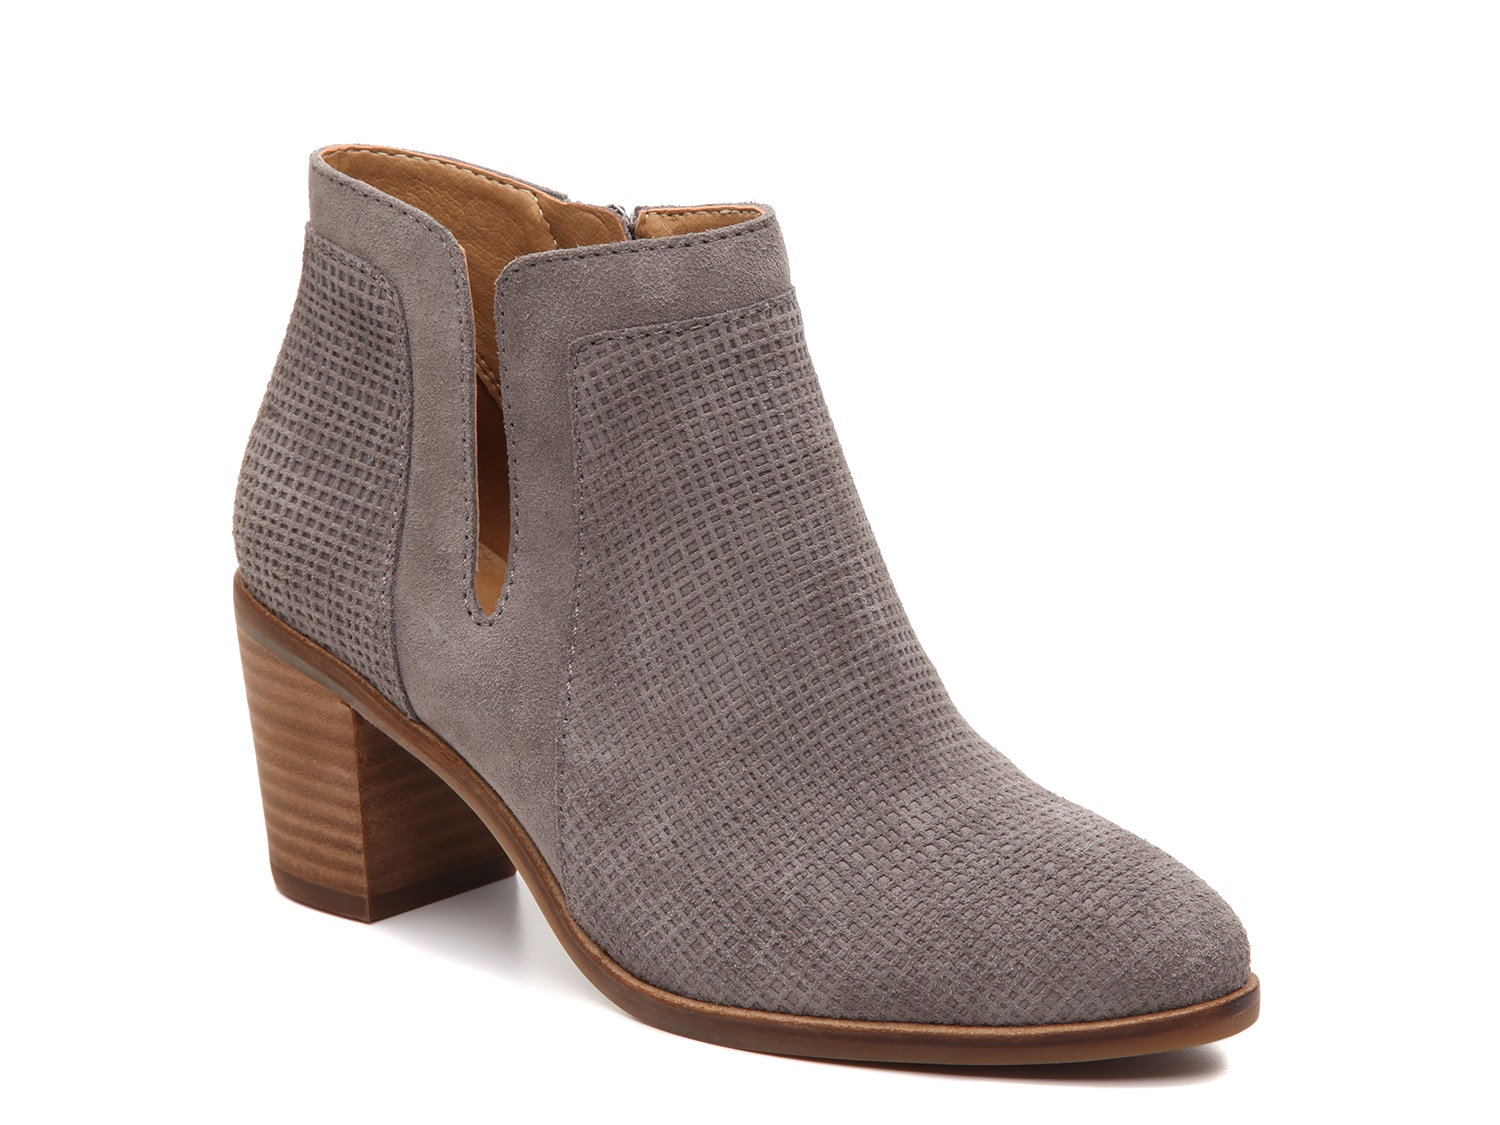 Lucky Brand Ponic Bootie Women's Shoes 